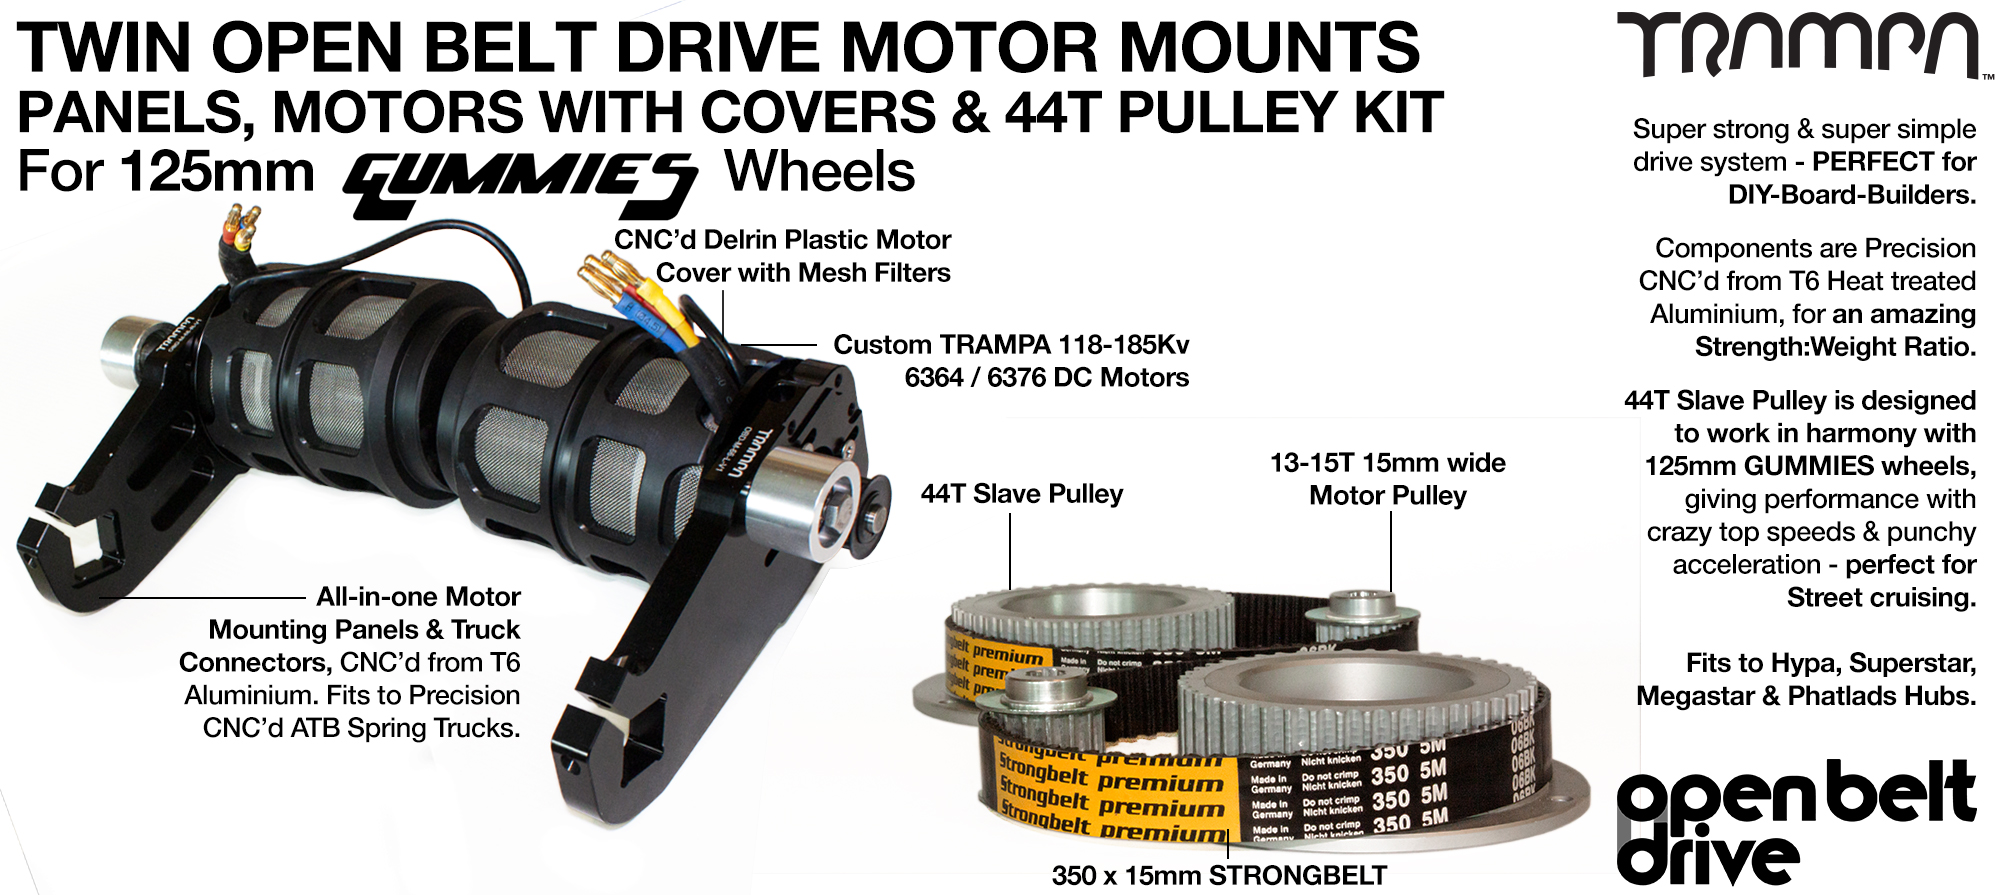 66T OBD Motor Mount with 44T Pulley kit, Motor & Filters  - TWIN